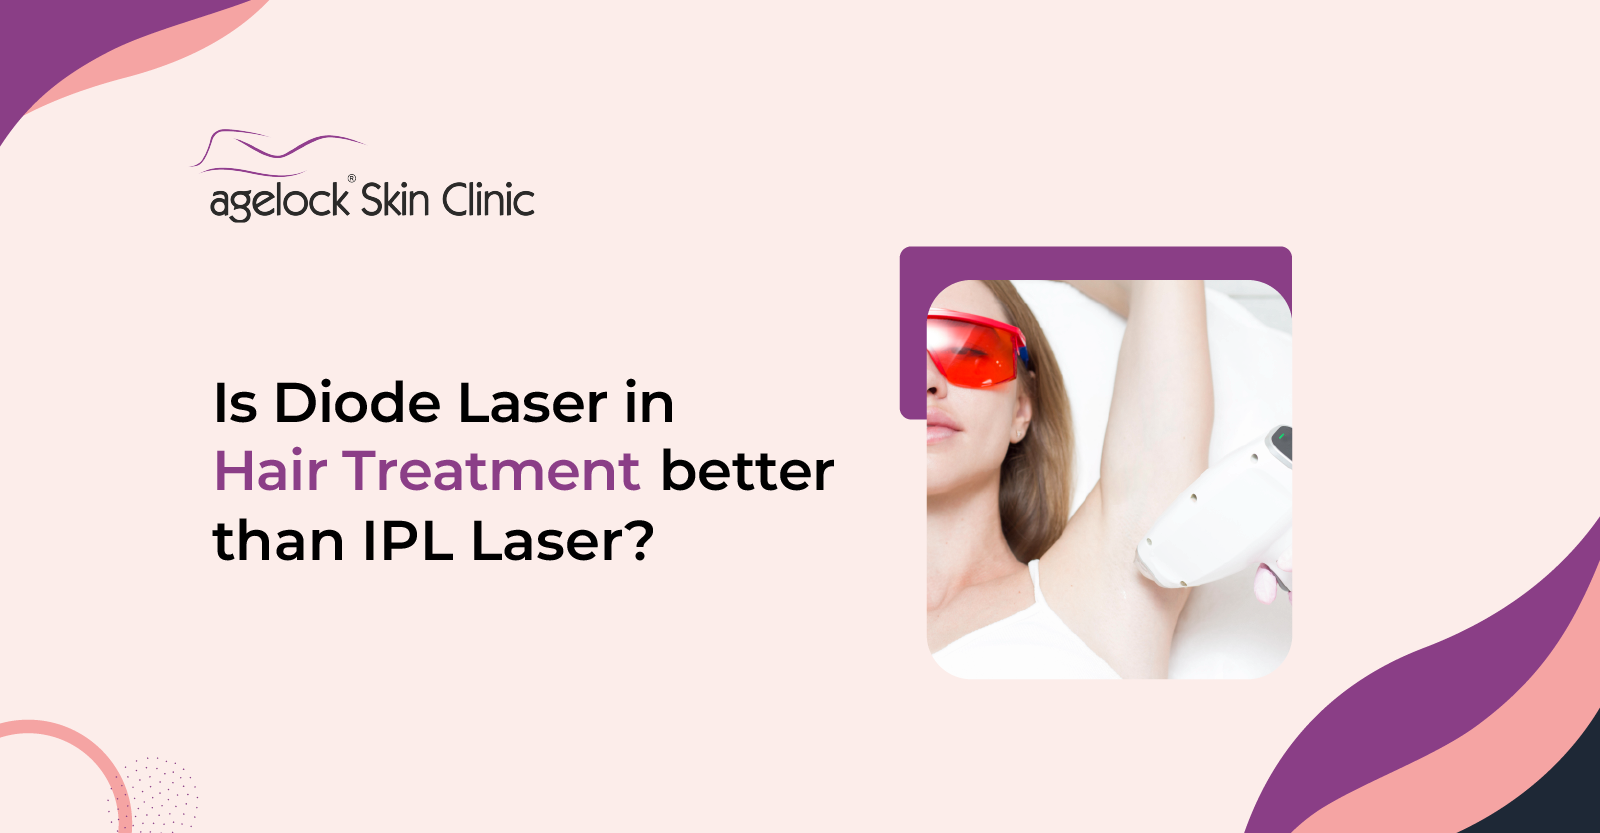 <strong>Is Diode Laser in Hair Treatment better than IPL Laser?</strong>